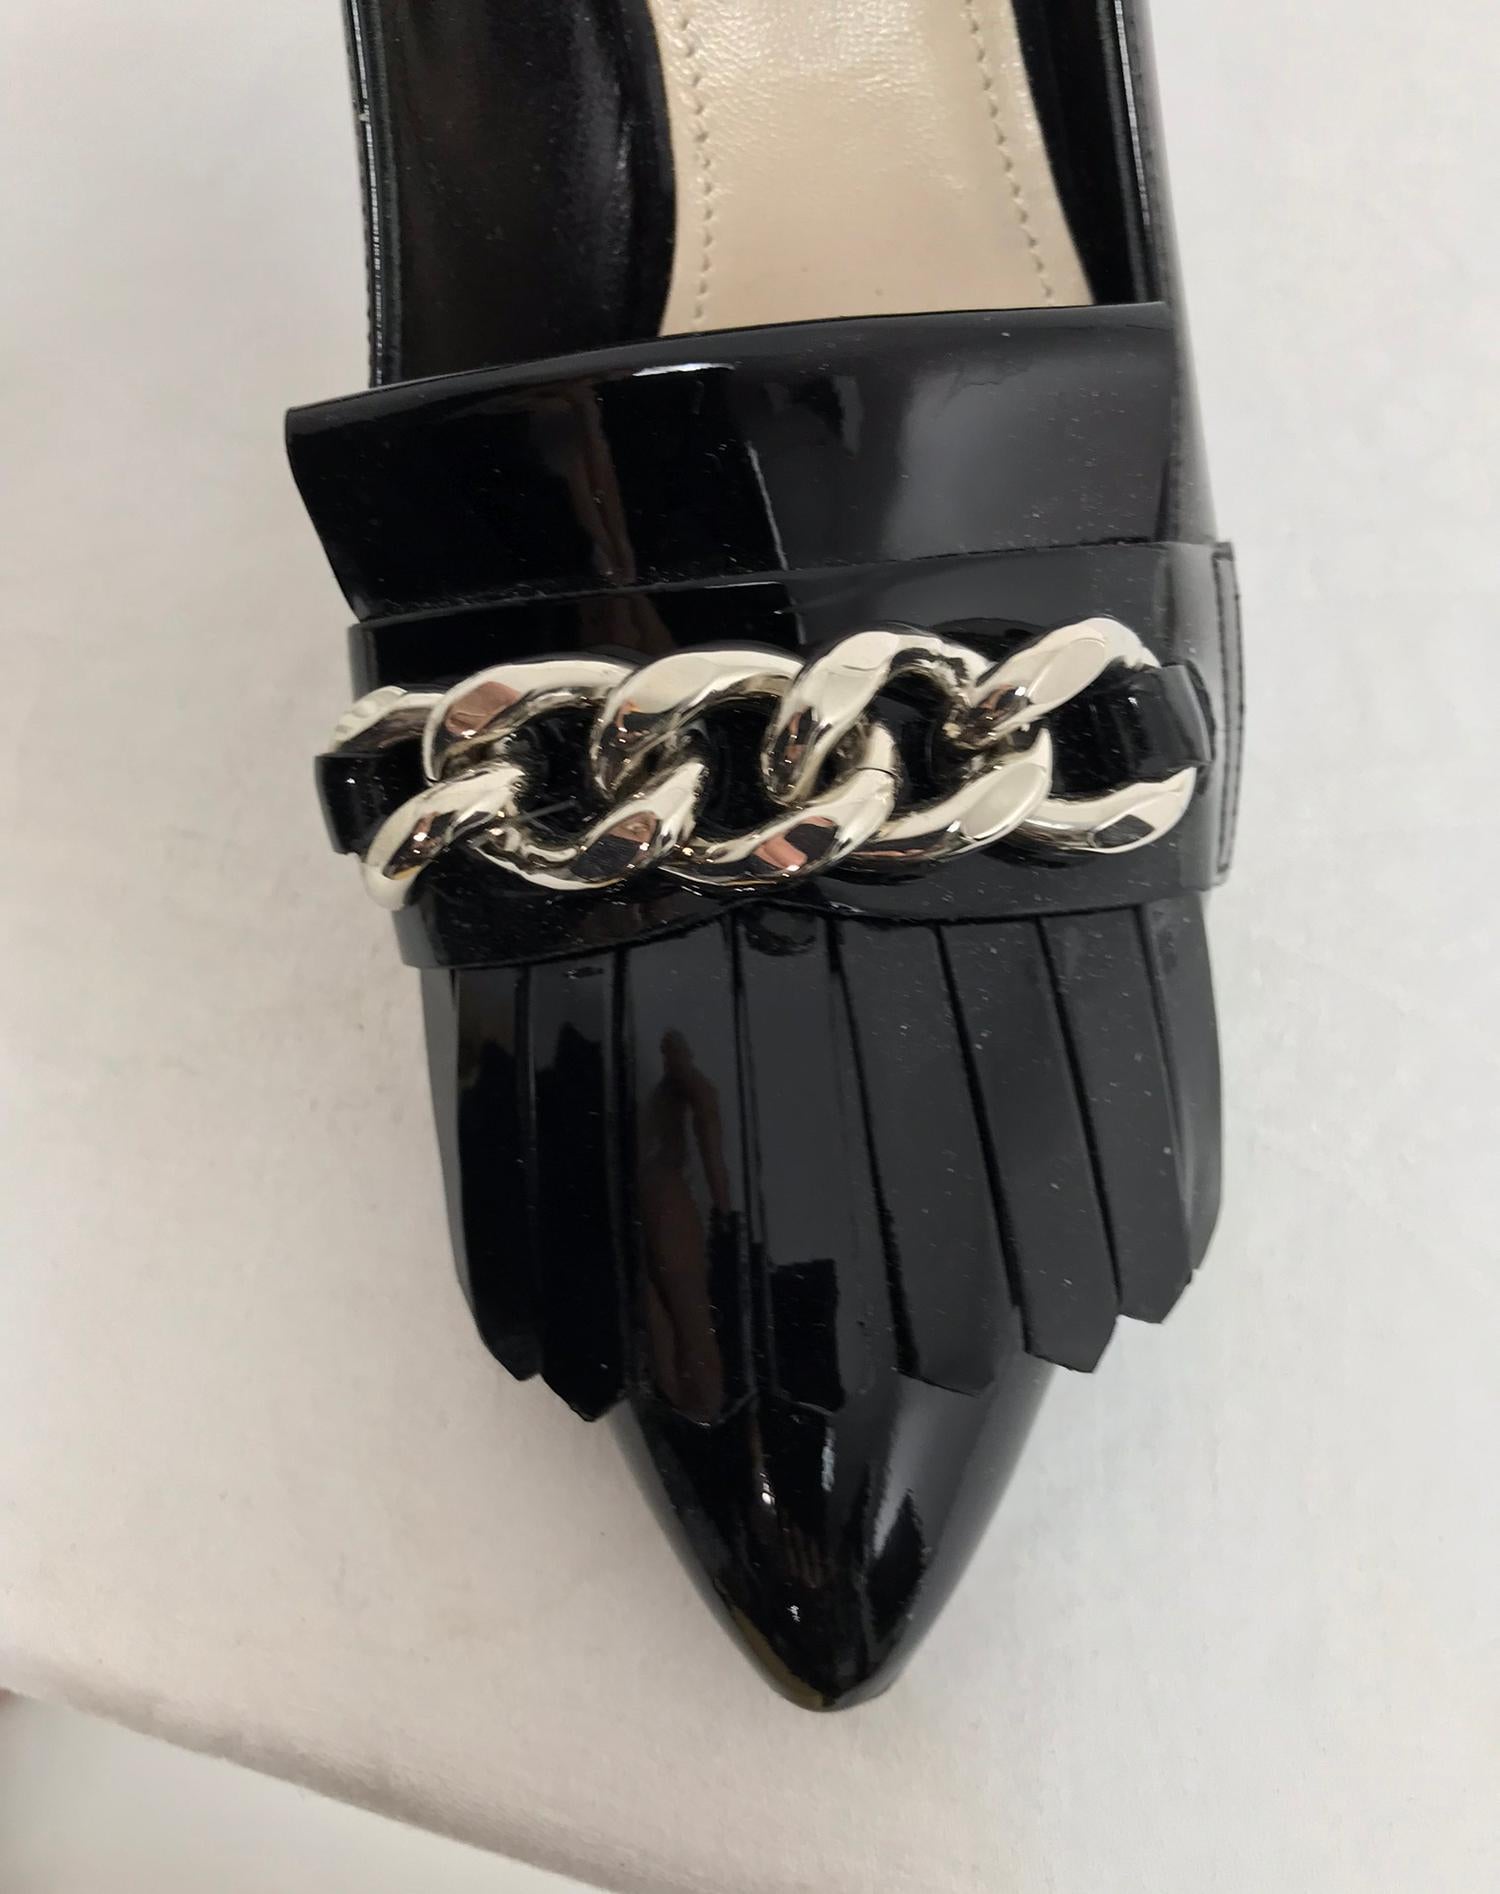 Prada Kiltie Chain Pumps in black patent leather 38M.  Crafted of black patent leather, Prada's pointed toe pumps are detailed at vamp with kiltie and silvertone curb-chain strap. 3.25